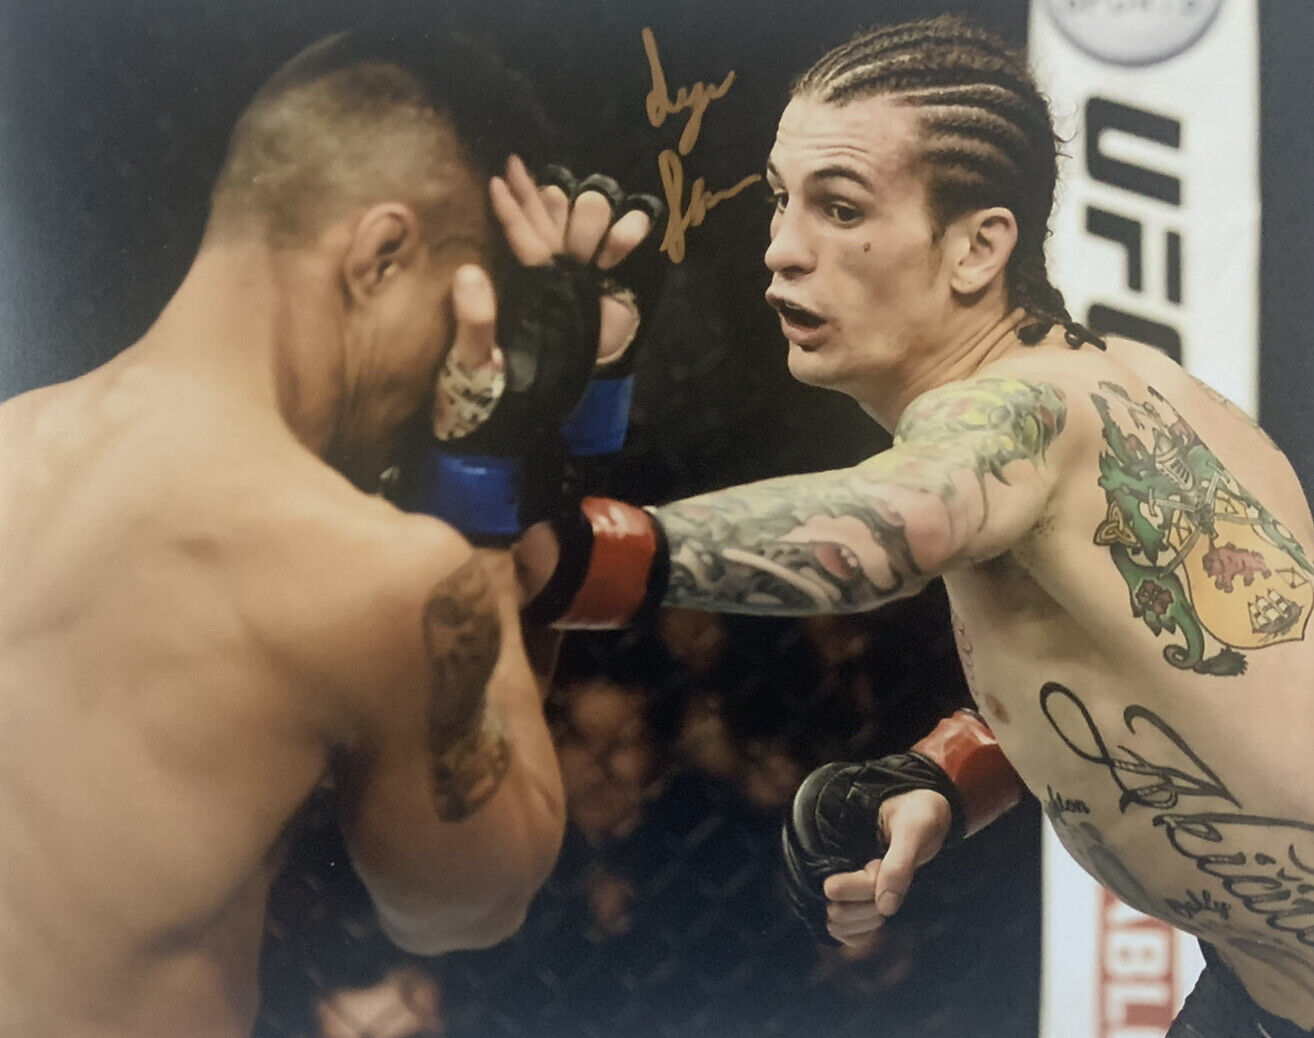 SEAN O’MALLEY HAND SIGNED 8x10 Photo Poster painting UFC FIGHTER RARE AUTHENTIC AUTOGRAPH SUGA